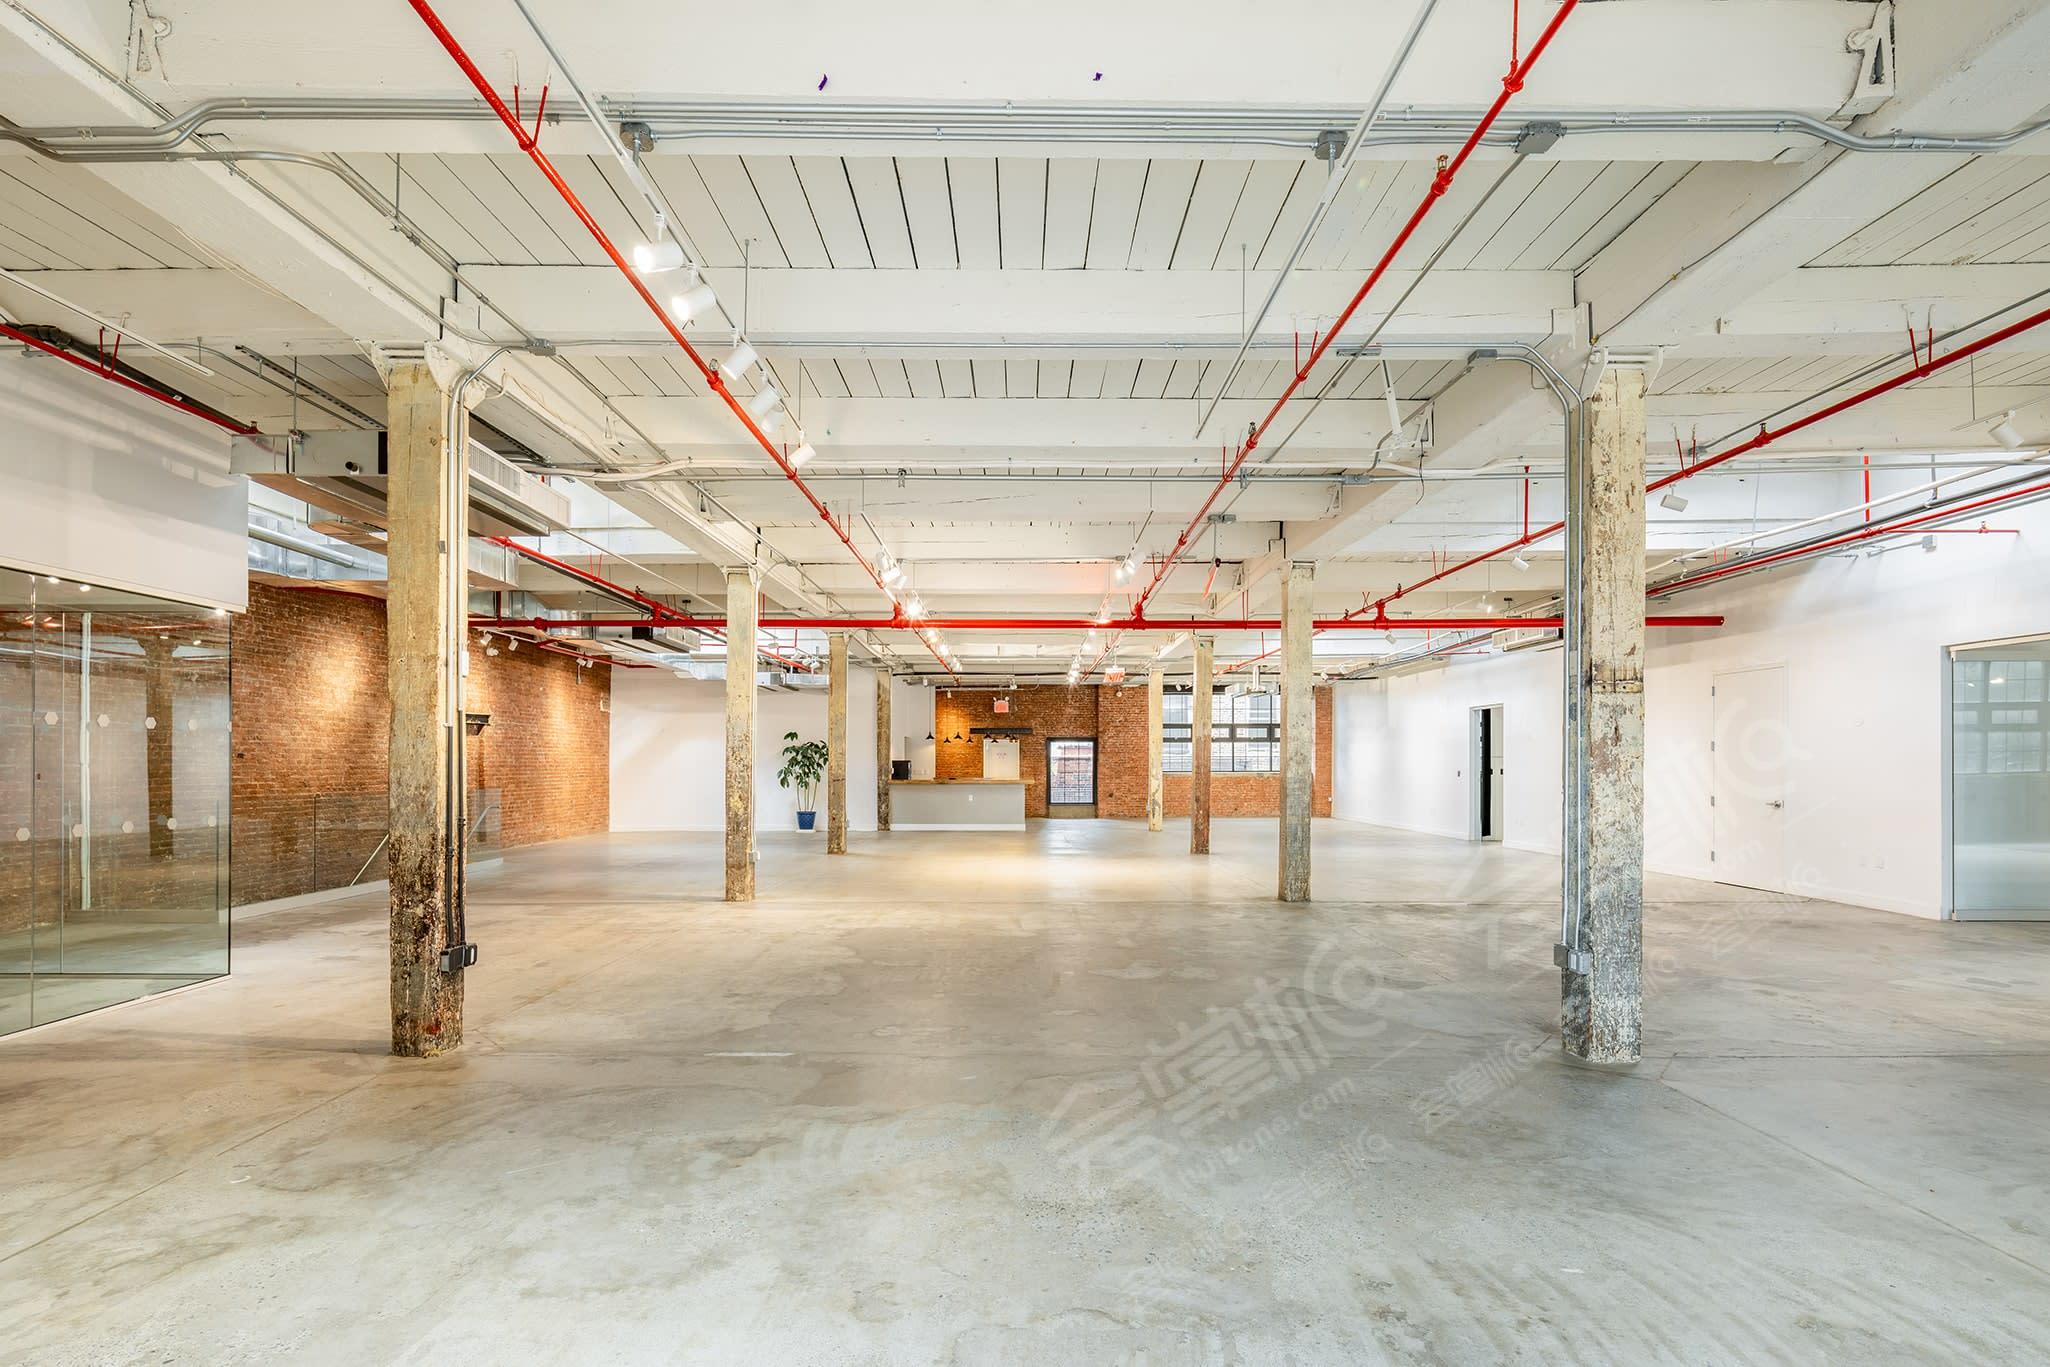 Spacious Flex Space Perfect for Markets, Expos & Pop-Up Events